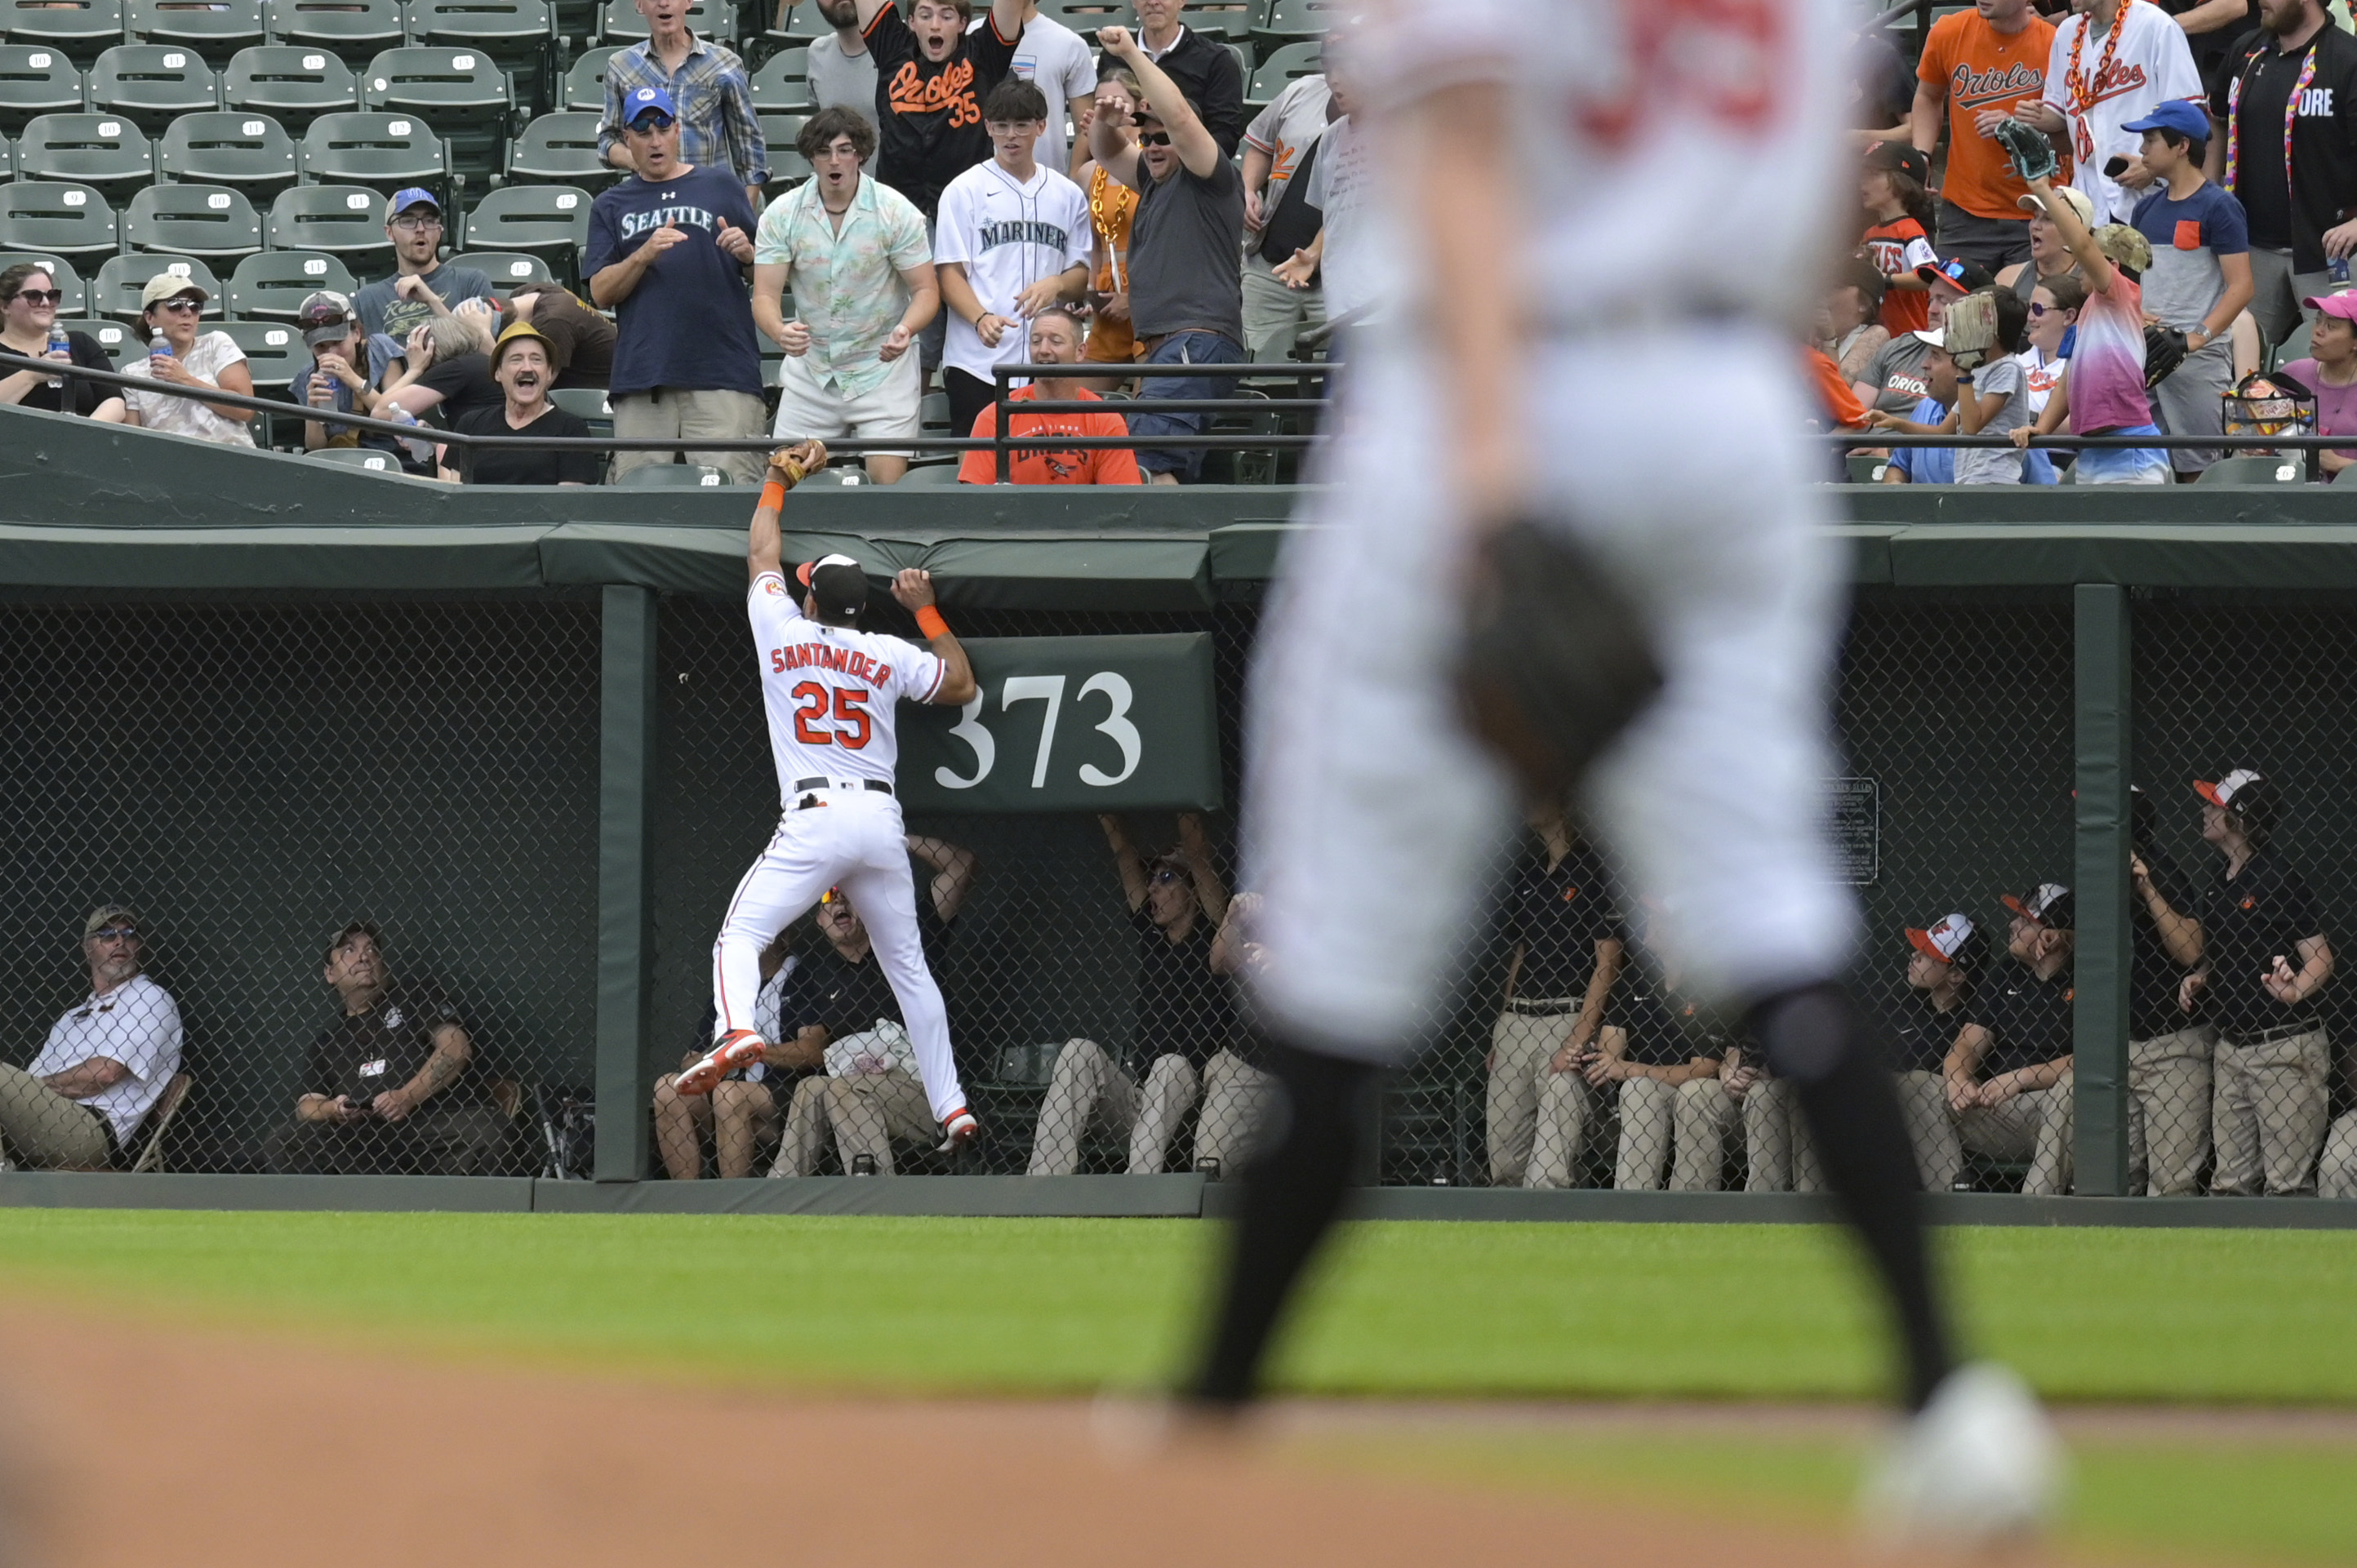 Santander hits 9th-inning homer to give the Orioles a 1-0 win in